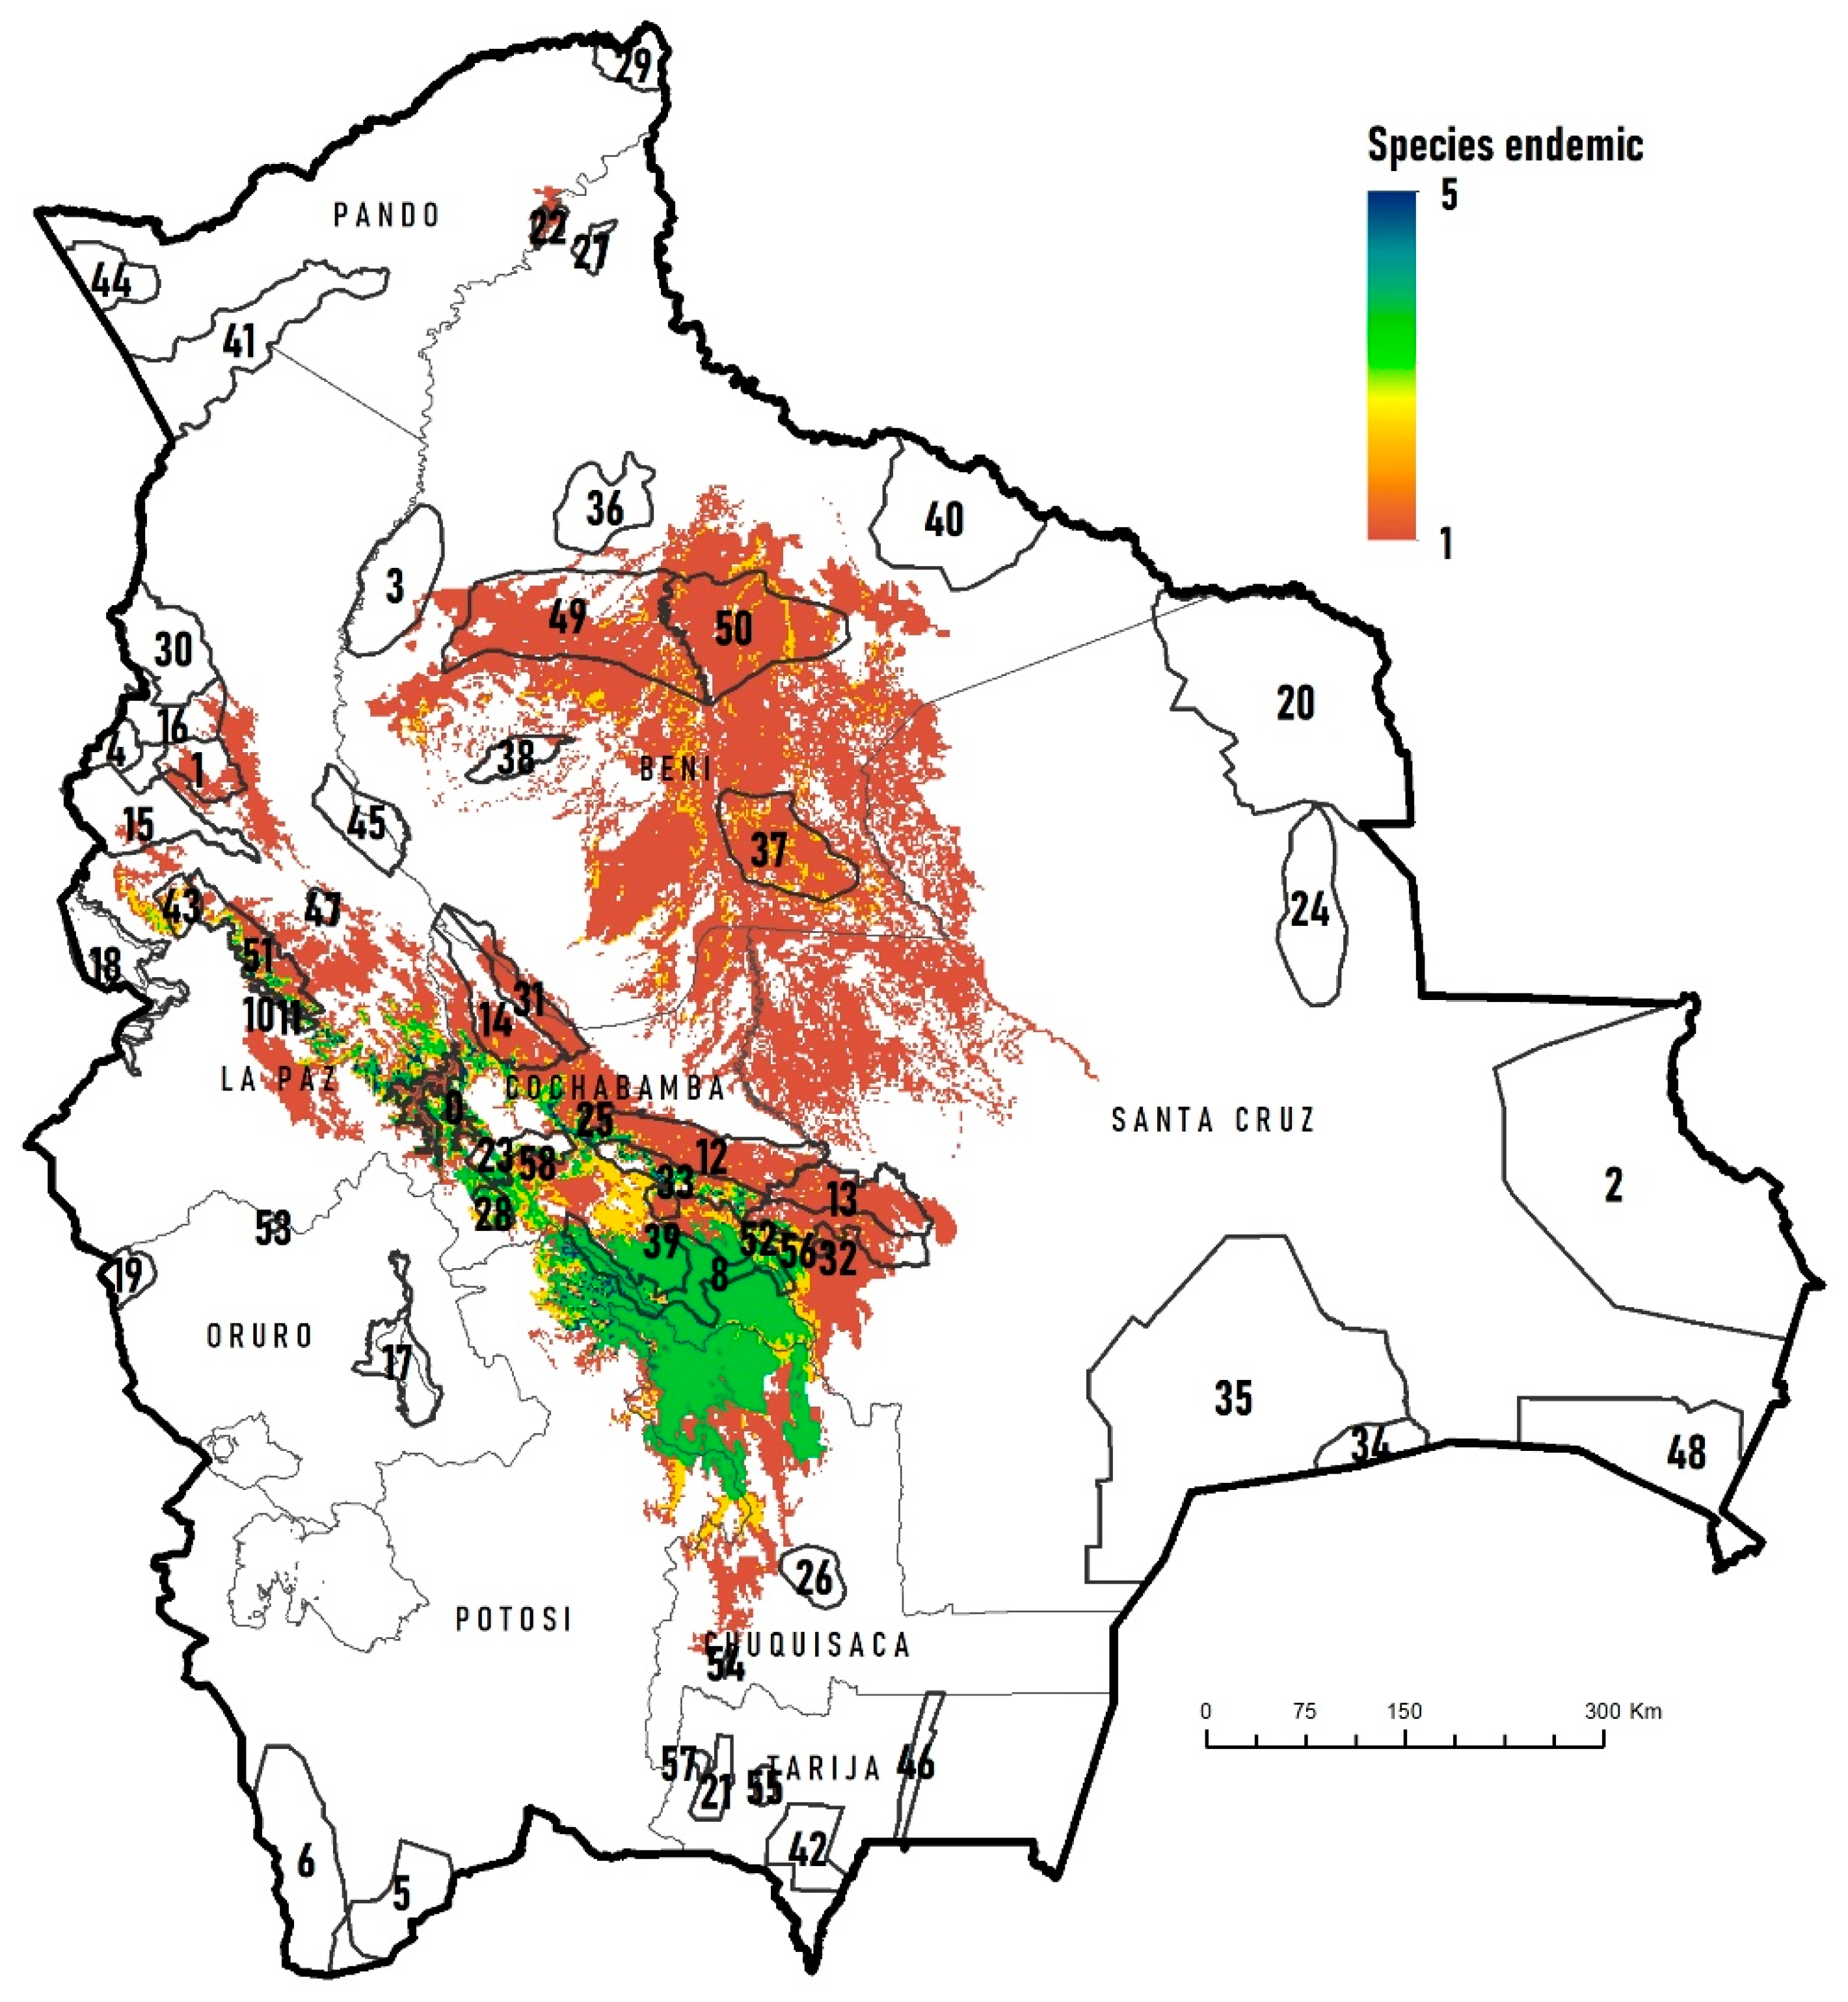 Fire | Free Full-Text | Impact of Fires on Key Biodiversity Areas (KBAs)  and Priority Bird Species for Conservation in Bolivia